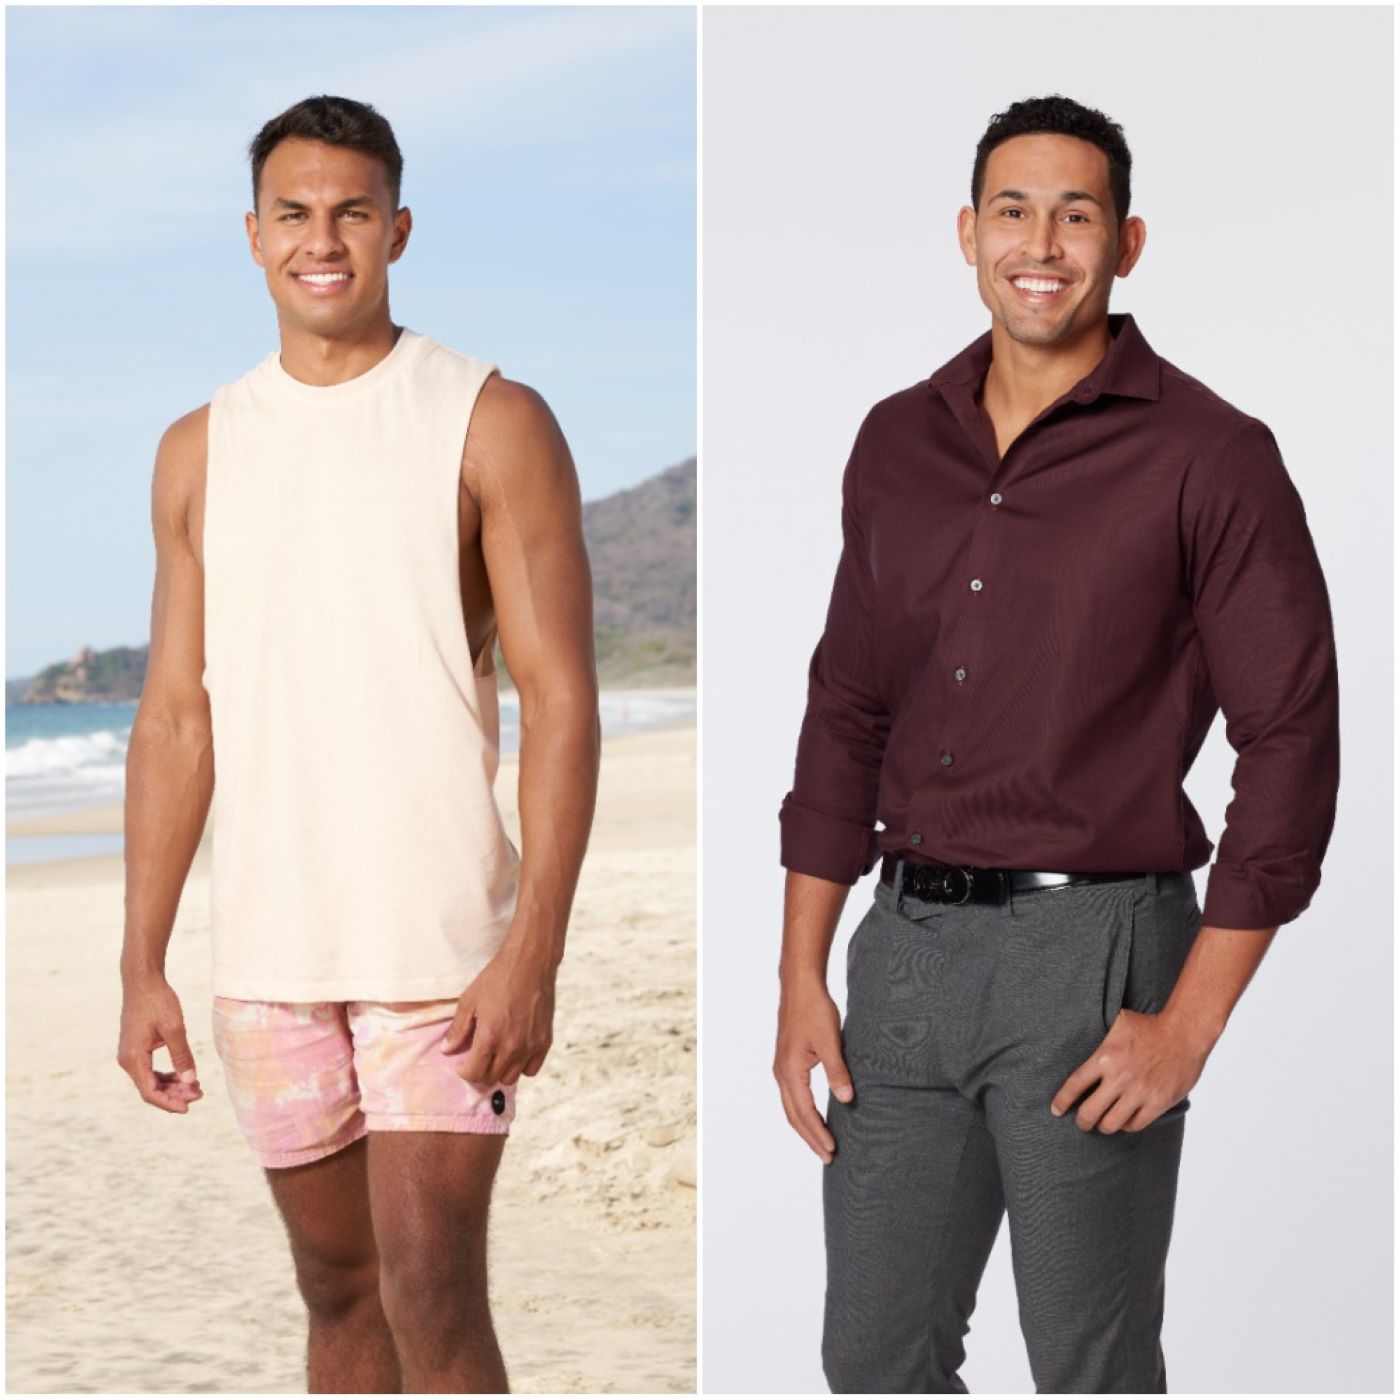 'Bachelor in Paradise' stars Aaron Clancy and Thomas Jacobs